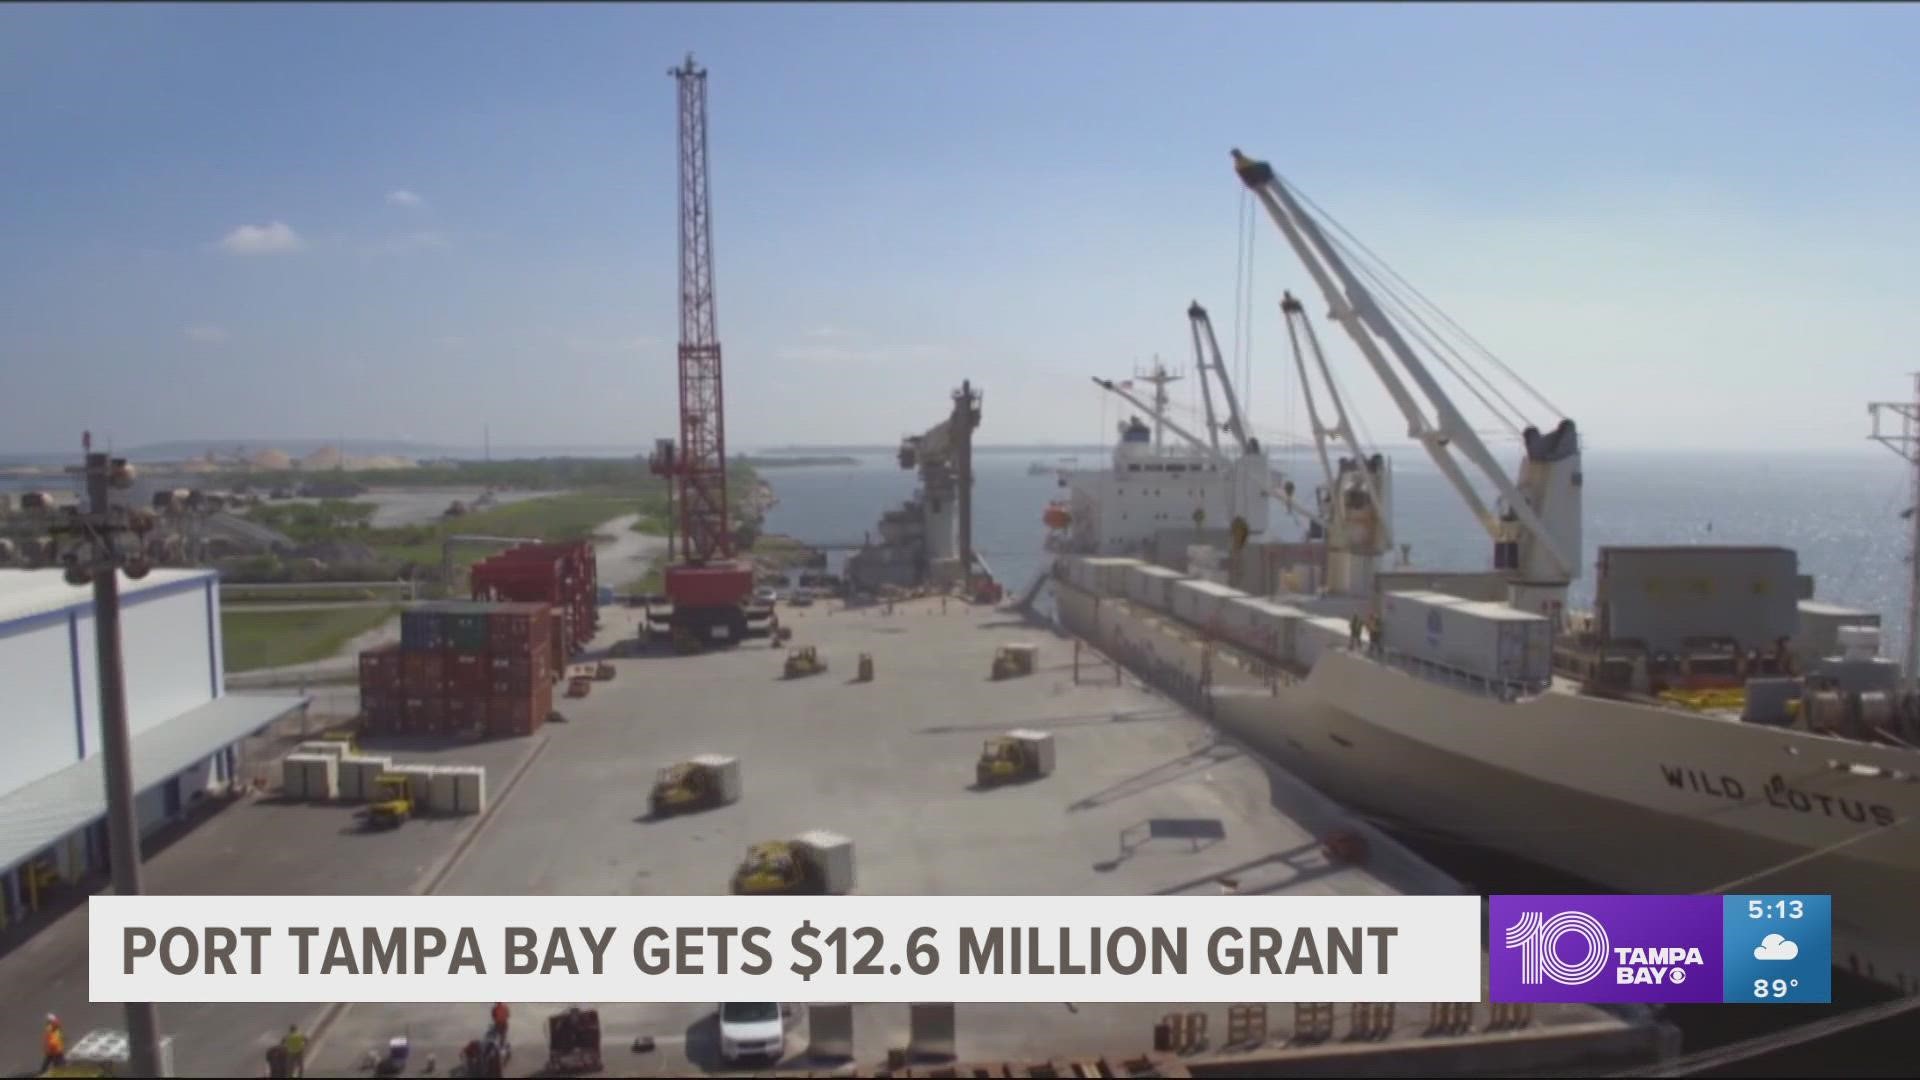 Supporting port Tampa Bay is important in untangling supply chains and lowering costs for families, Rep. Castor said.